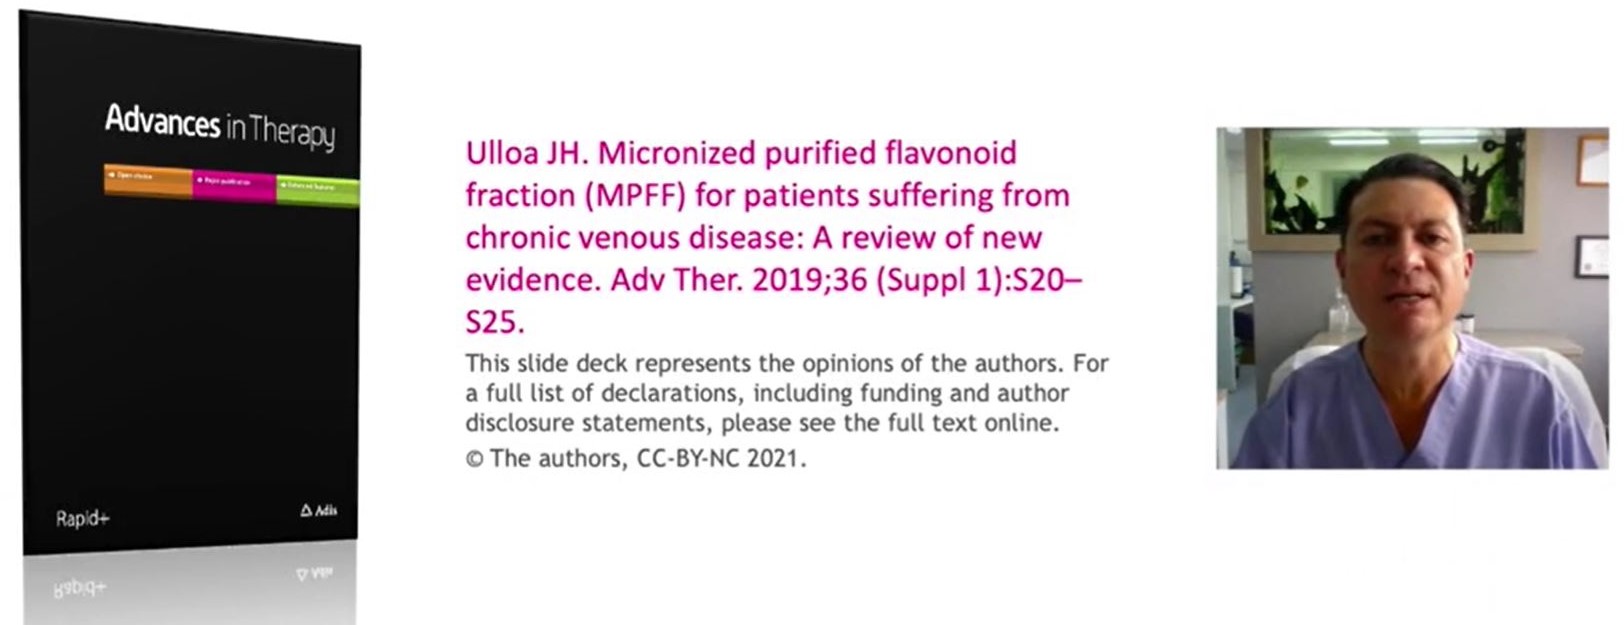 Micronized Purified Flavonoid Fraction (MPFF) For Patients Suffering From Chronic Venous Disease: A Review of New Evidence